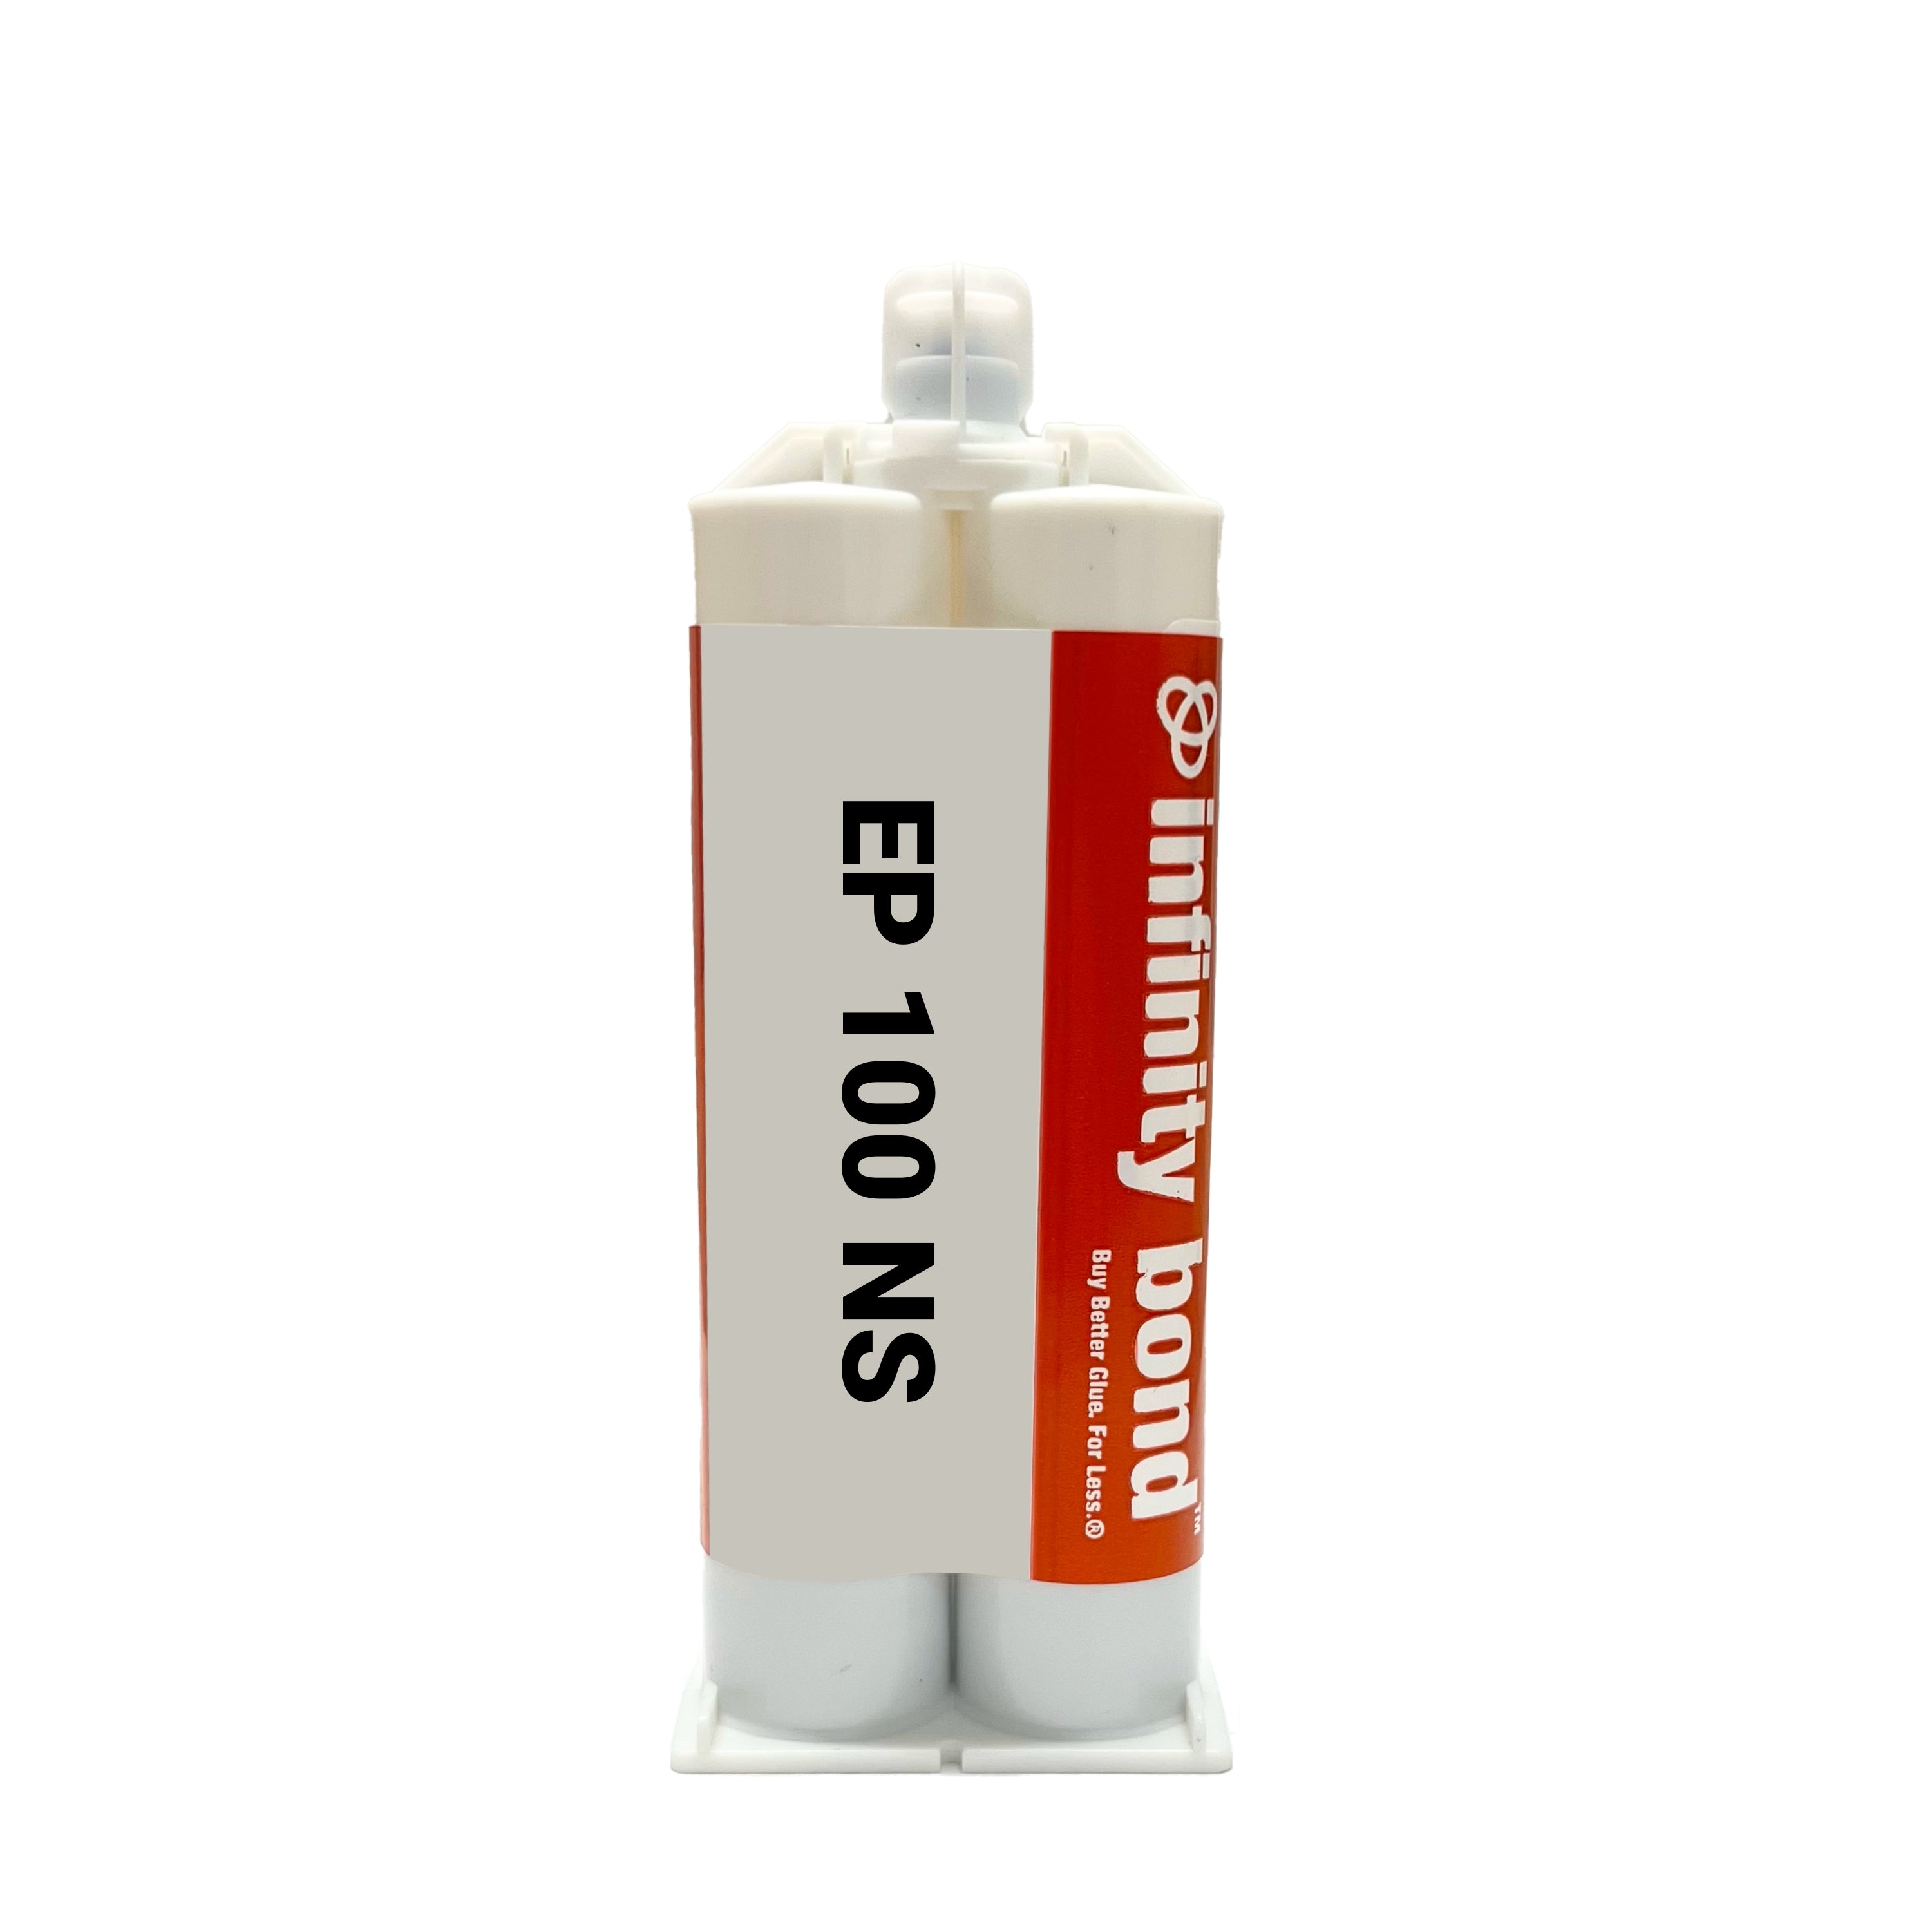 Powerful 3m silicone paste For Strength 